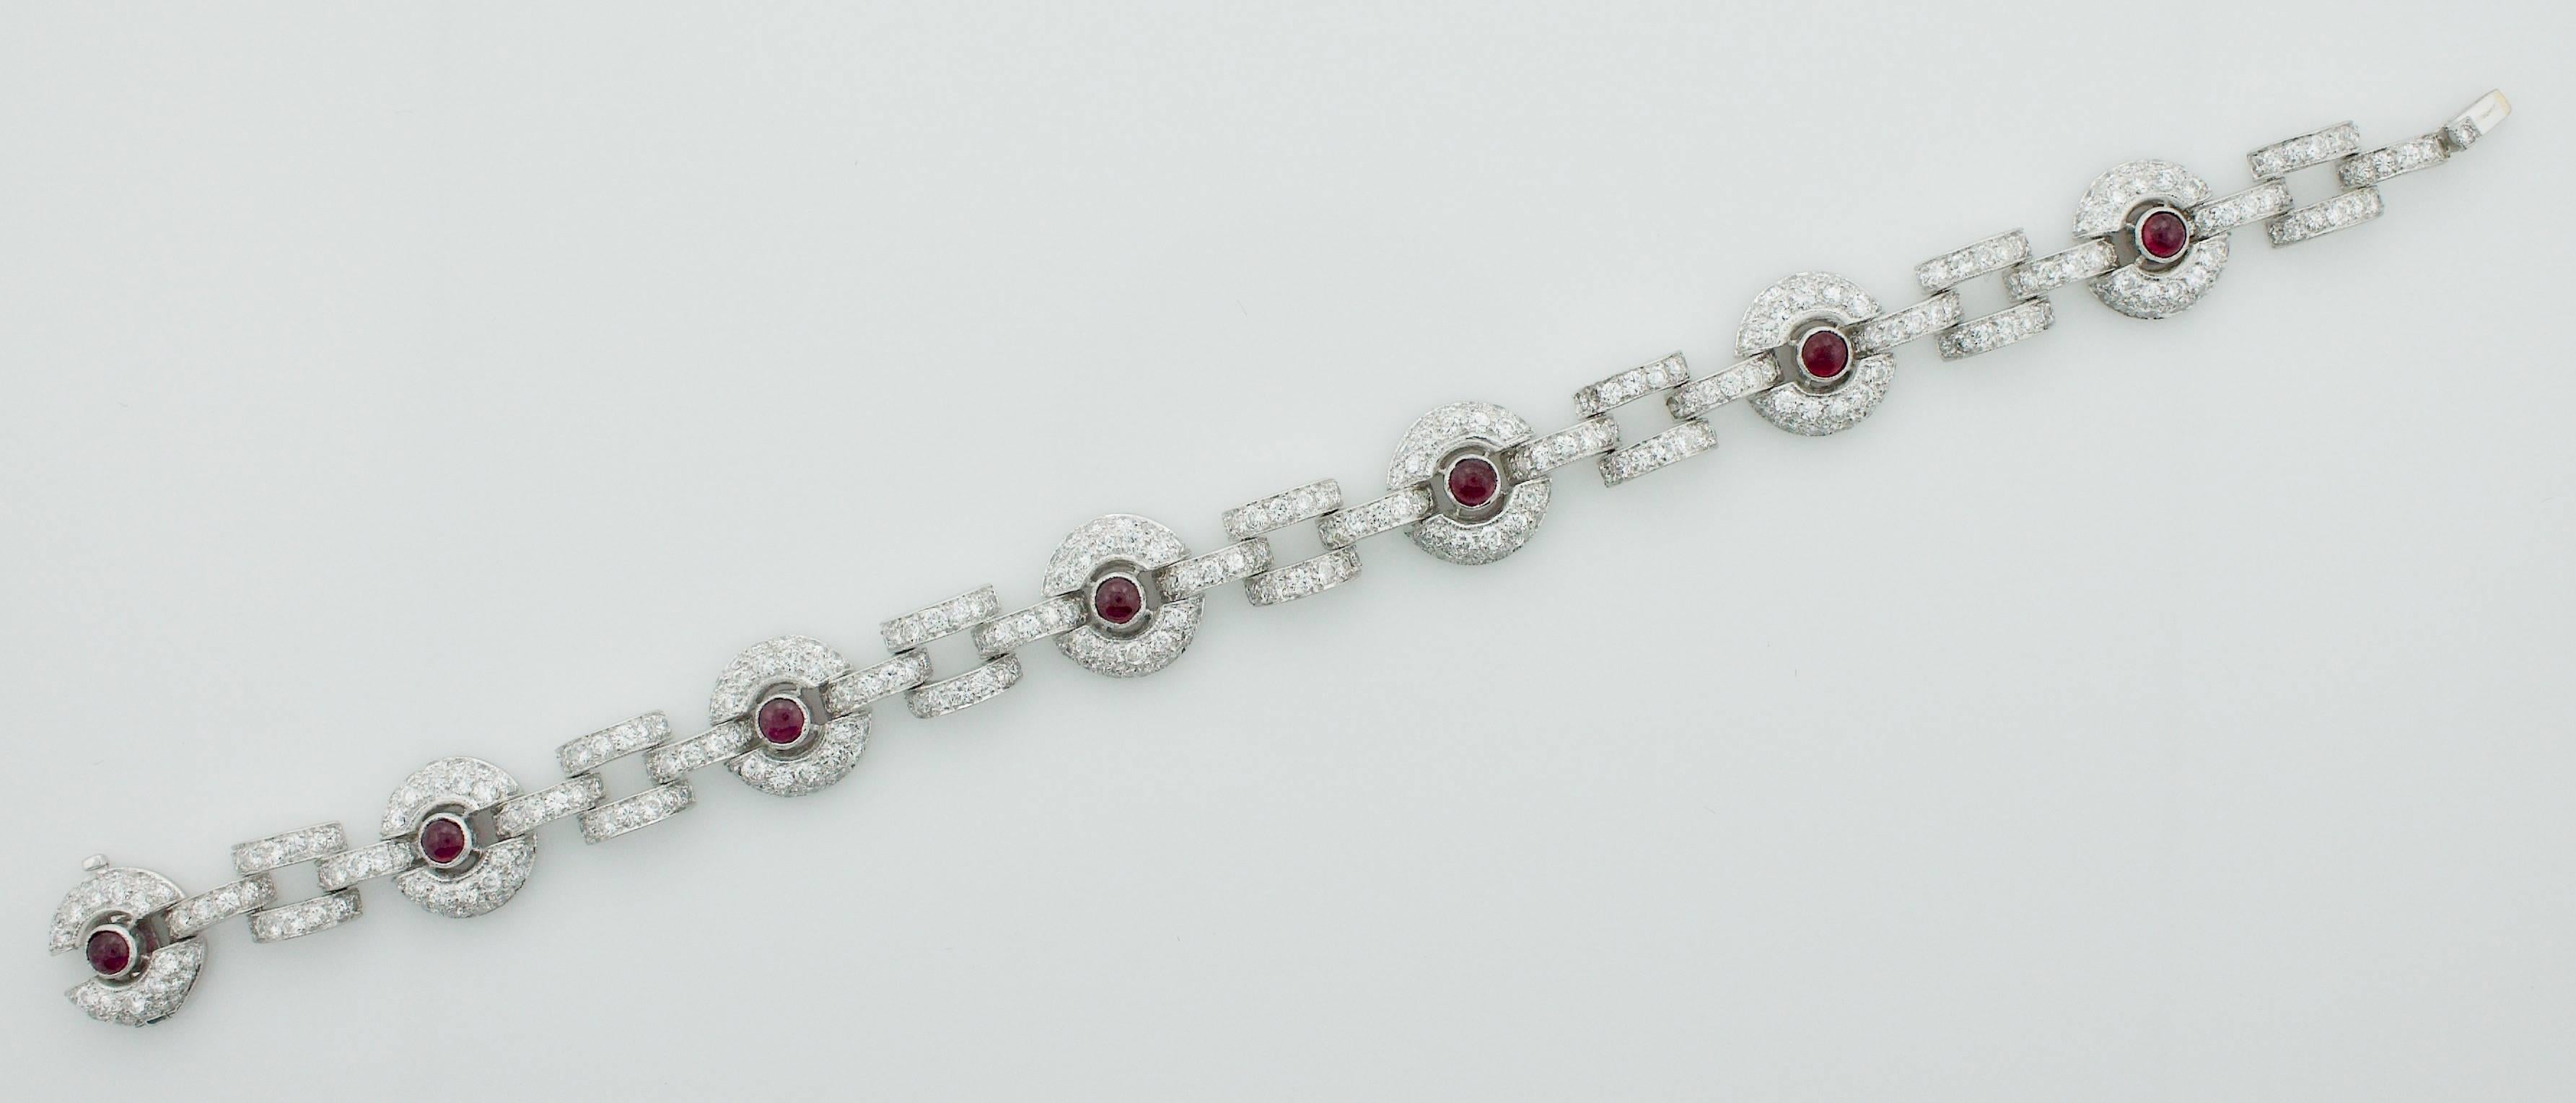 Cabochon Ruby and Diamond Bracelet In Excellent Condition For Sale In Wailea, HI